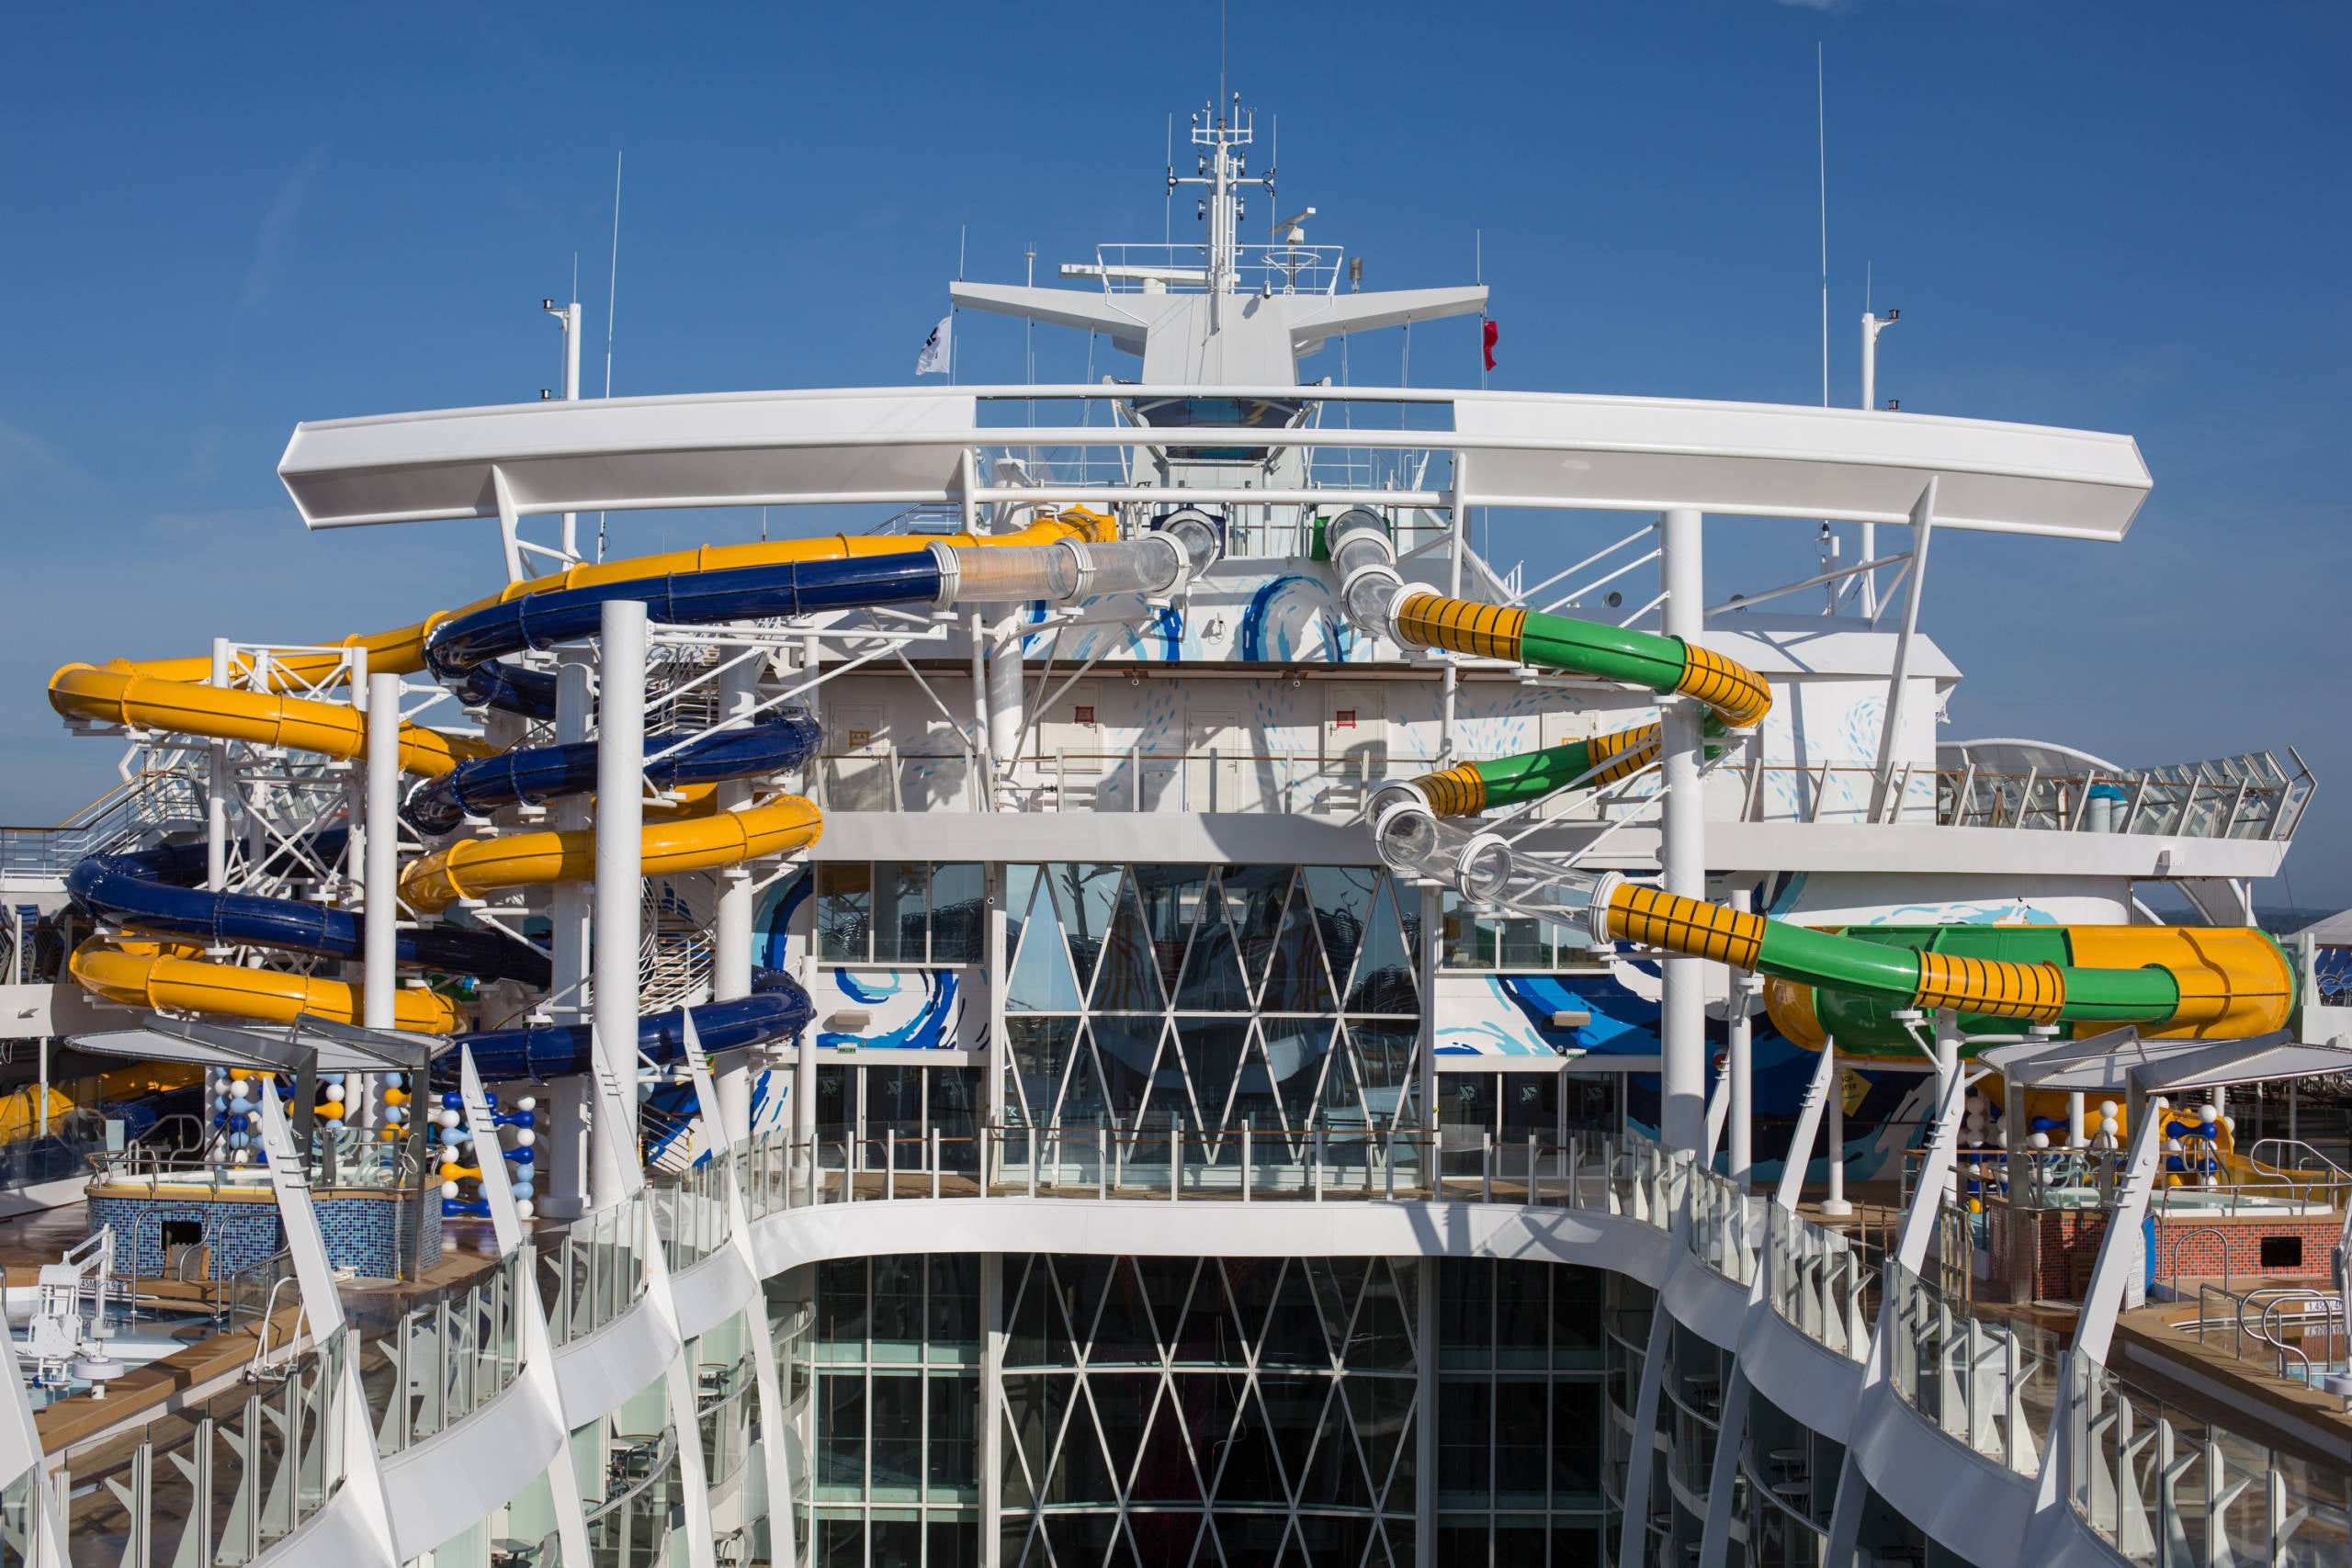 The Perfect Storm complex of waterslides is a highlight of the top deck of Royal Caribbean's Harmony of the Seas. (Photo courtesy of Royal Caribbean).